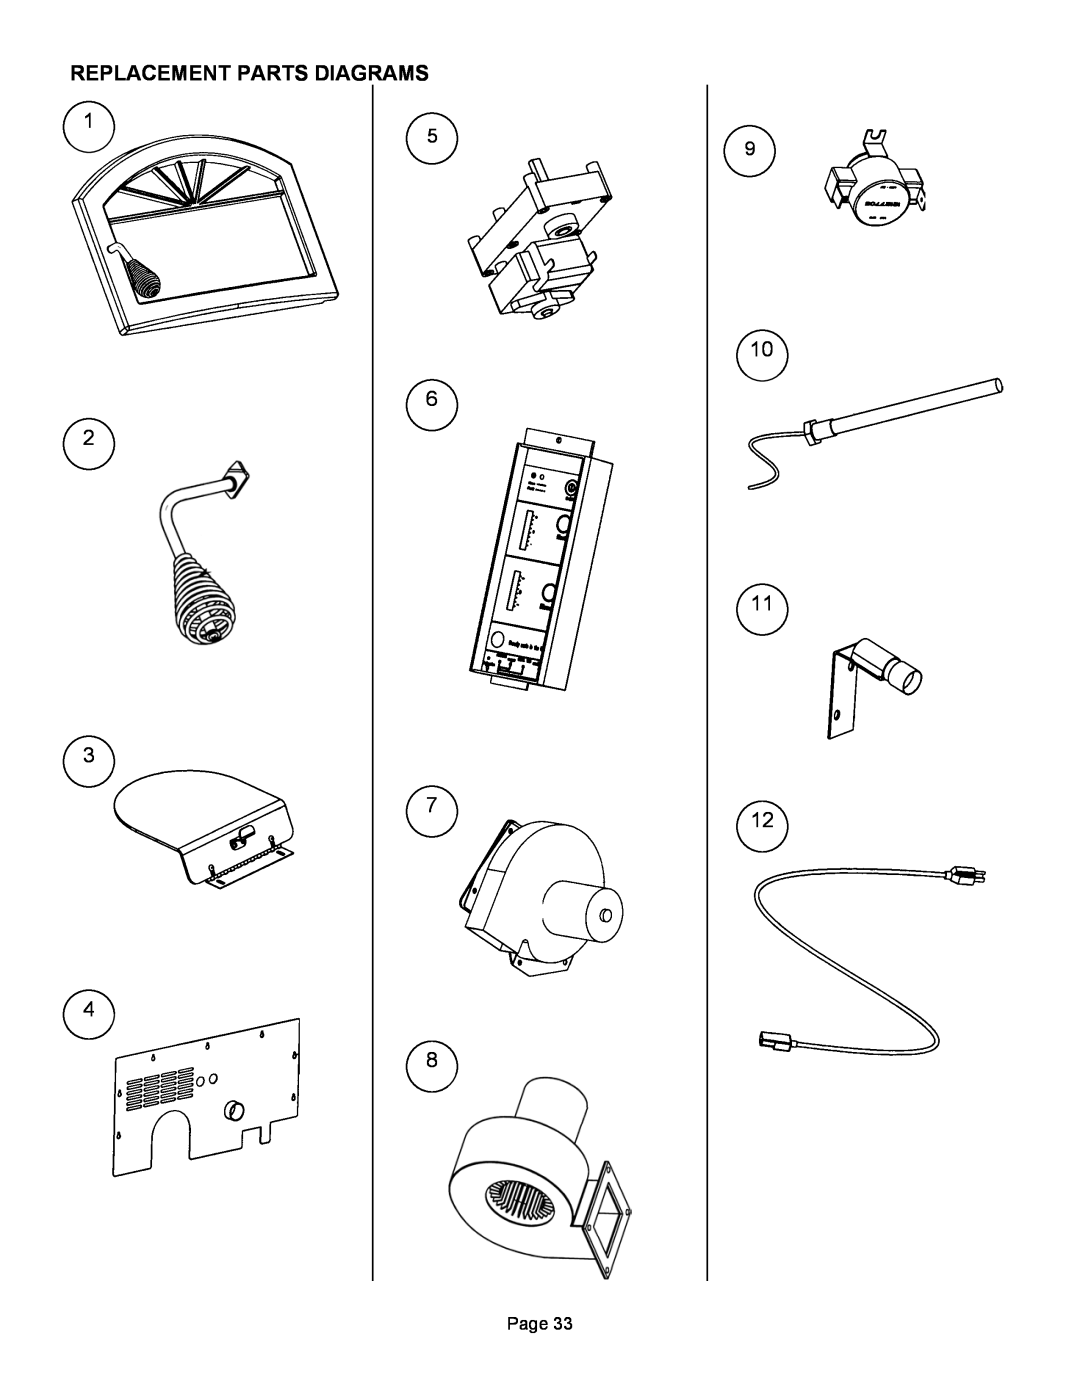 Lennox Hearth T300P operation manual Replacement Parts Diagrams, Page 